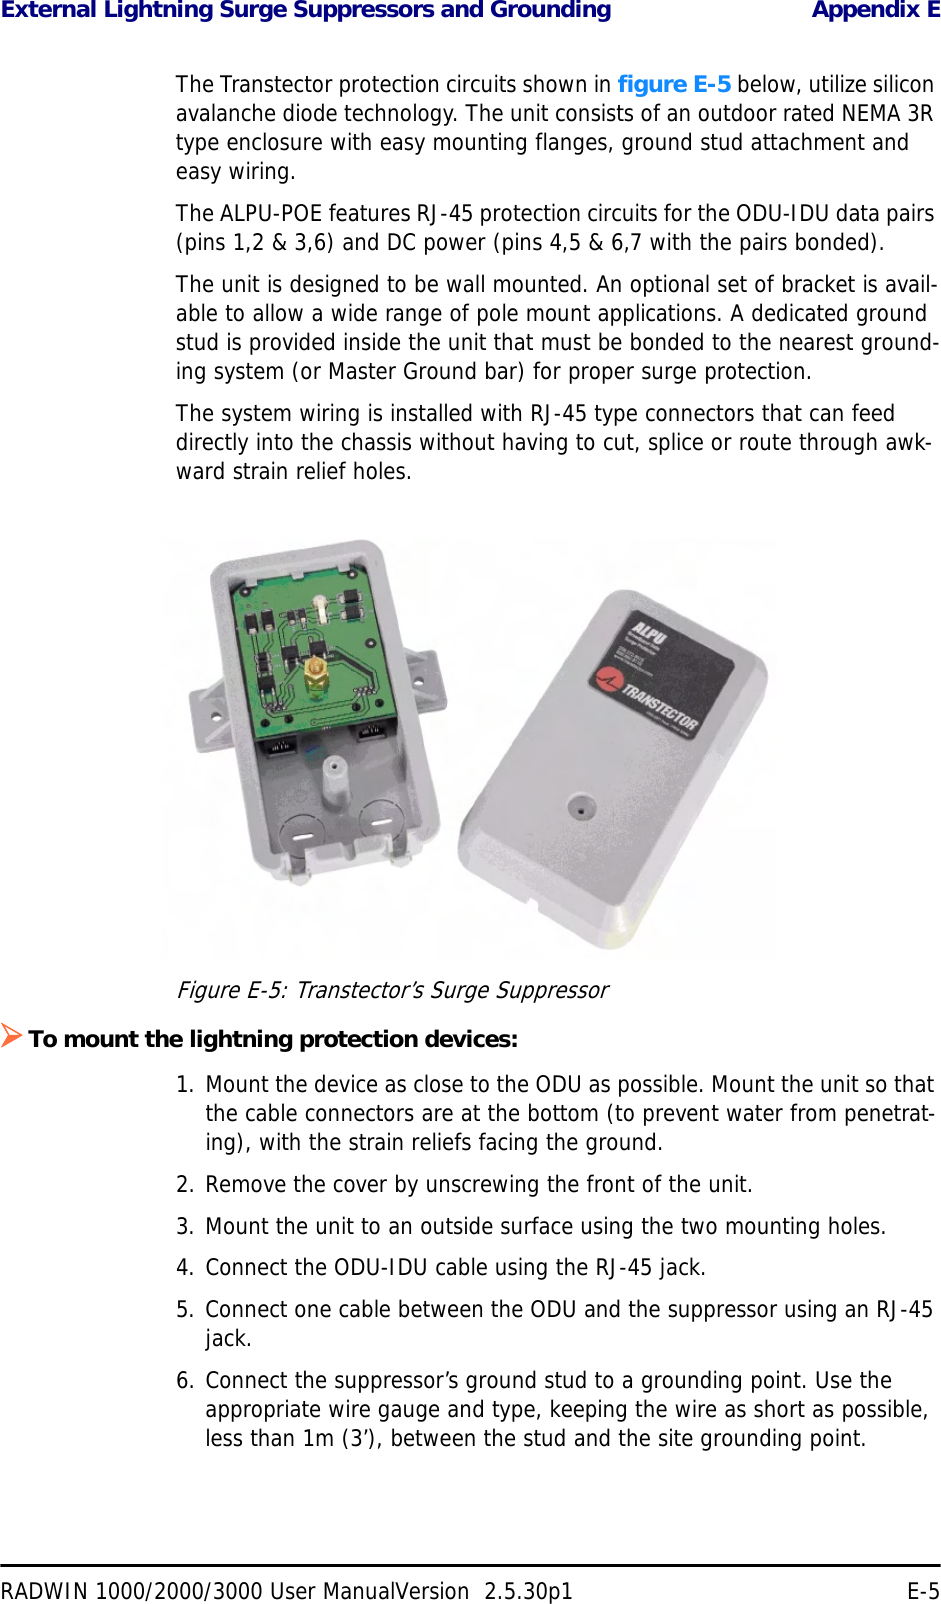 External Lightning Surge Suppressors and Grounding Appendix ERADWIN 1000/2000/3000 User ManualVersion  2.5.30p1 E-5The Transtector protection circuits shown in figure E-5 below, utilize silicon avalanche diode technology. The unit consists of an outdoor rated NEMA 3R type enclosure with easy mounting flanges, ground stud attachment and easy wiring.The ALPU-POE features RJ-45 protection circuits for the ODU-IDU data pairs (pins 1,2 &amp; 3,6) and DC power (pins 4,5 &amp; 6,7 with the pairs bonded).The unit is designed to be wall mounted. An optional set of bracket is avail-able to allow a wide range of pole mount applications. A dedicated ground stud is provided inside the unit that must be bonded to the nearest ground-ing system (or Master Ground bar) for proper surge protection.The system wiring is installed with RJ-45 type connectors that can feed directly into the chassis without having to cut, splice or route through awk-ward strain relief holes.Figure E-5: Transtector’s Surge Suppressor¾To mount the lightning protection devices:1. Mount the device as close to the ODU as possible. Mount the unit so that the cable connectors are at the bottom (to prevent water from penetrat-ing), with the strain reliefs facing the ground.2. Remove the cover by unscrewing the front of the unit.3. Mount the unit to an outside surface using the two mounting holes.4. Connect the ODU-IDU cable using the RJ-45 jack.5. Connect one cable between the ODU and the suppressor using an RJ-45 jack.6. Connect the suppressor’s ground stud to a grounding point. Use the appropriate wire gauge and type, keeping the wire as short as possible, less than 1m (3’), between the stud and the site grounding point.